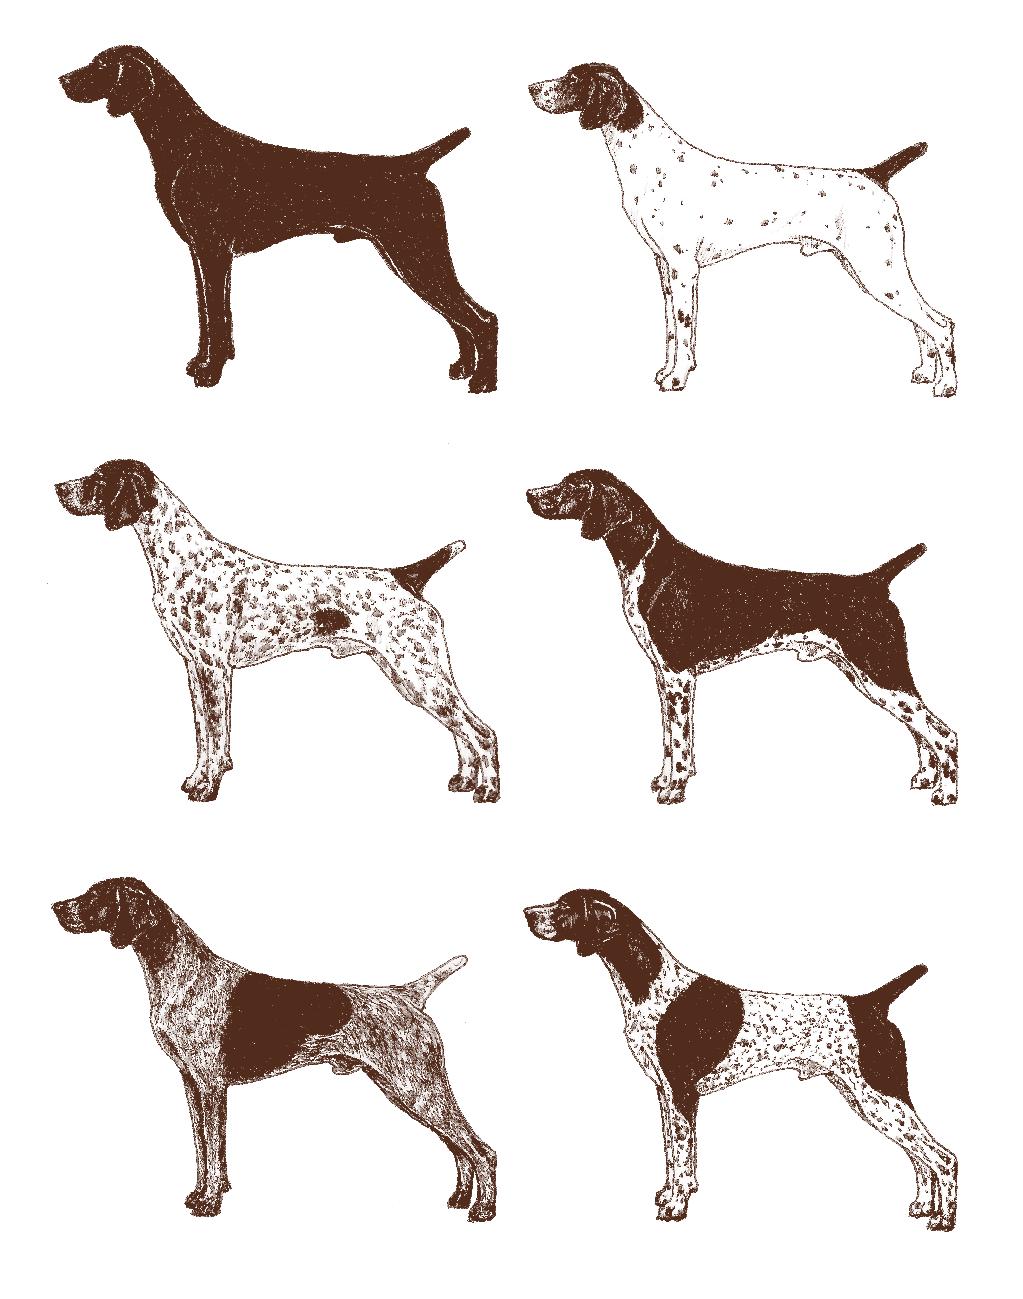 Color Continued... Some of the various coat patterns found within the breed. It is important to remember the GSP may be found in any combination of liver and white, not just limited to those depicted.